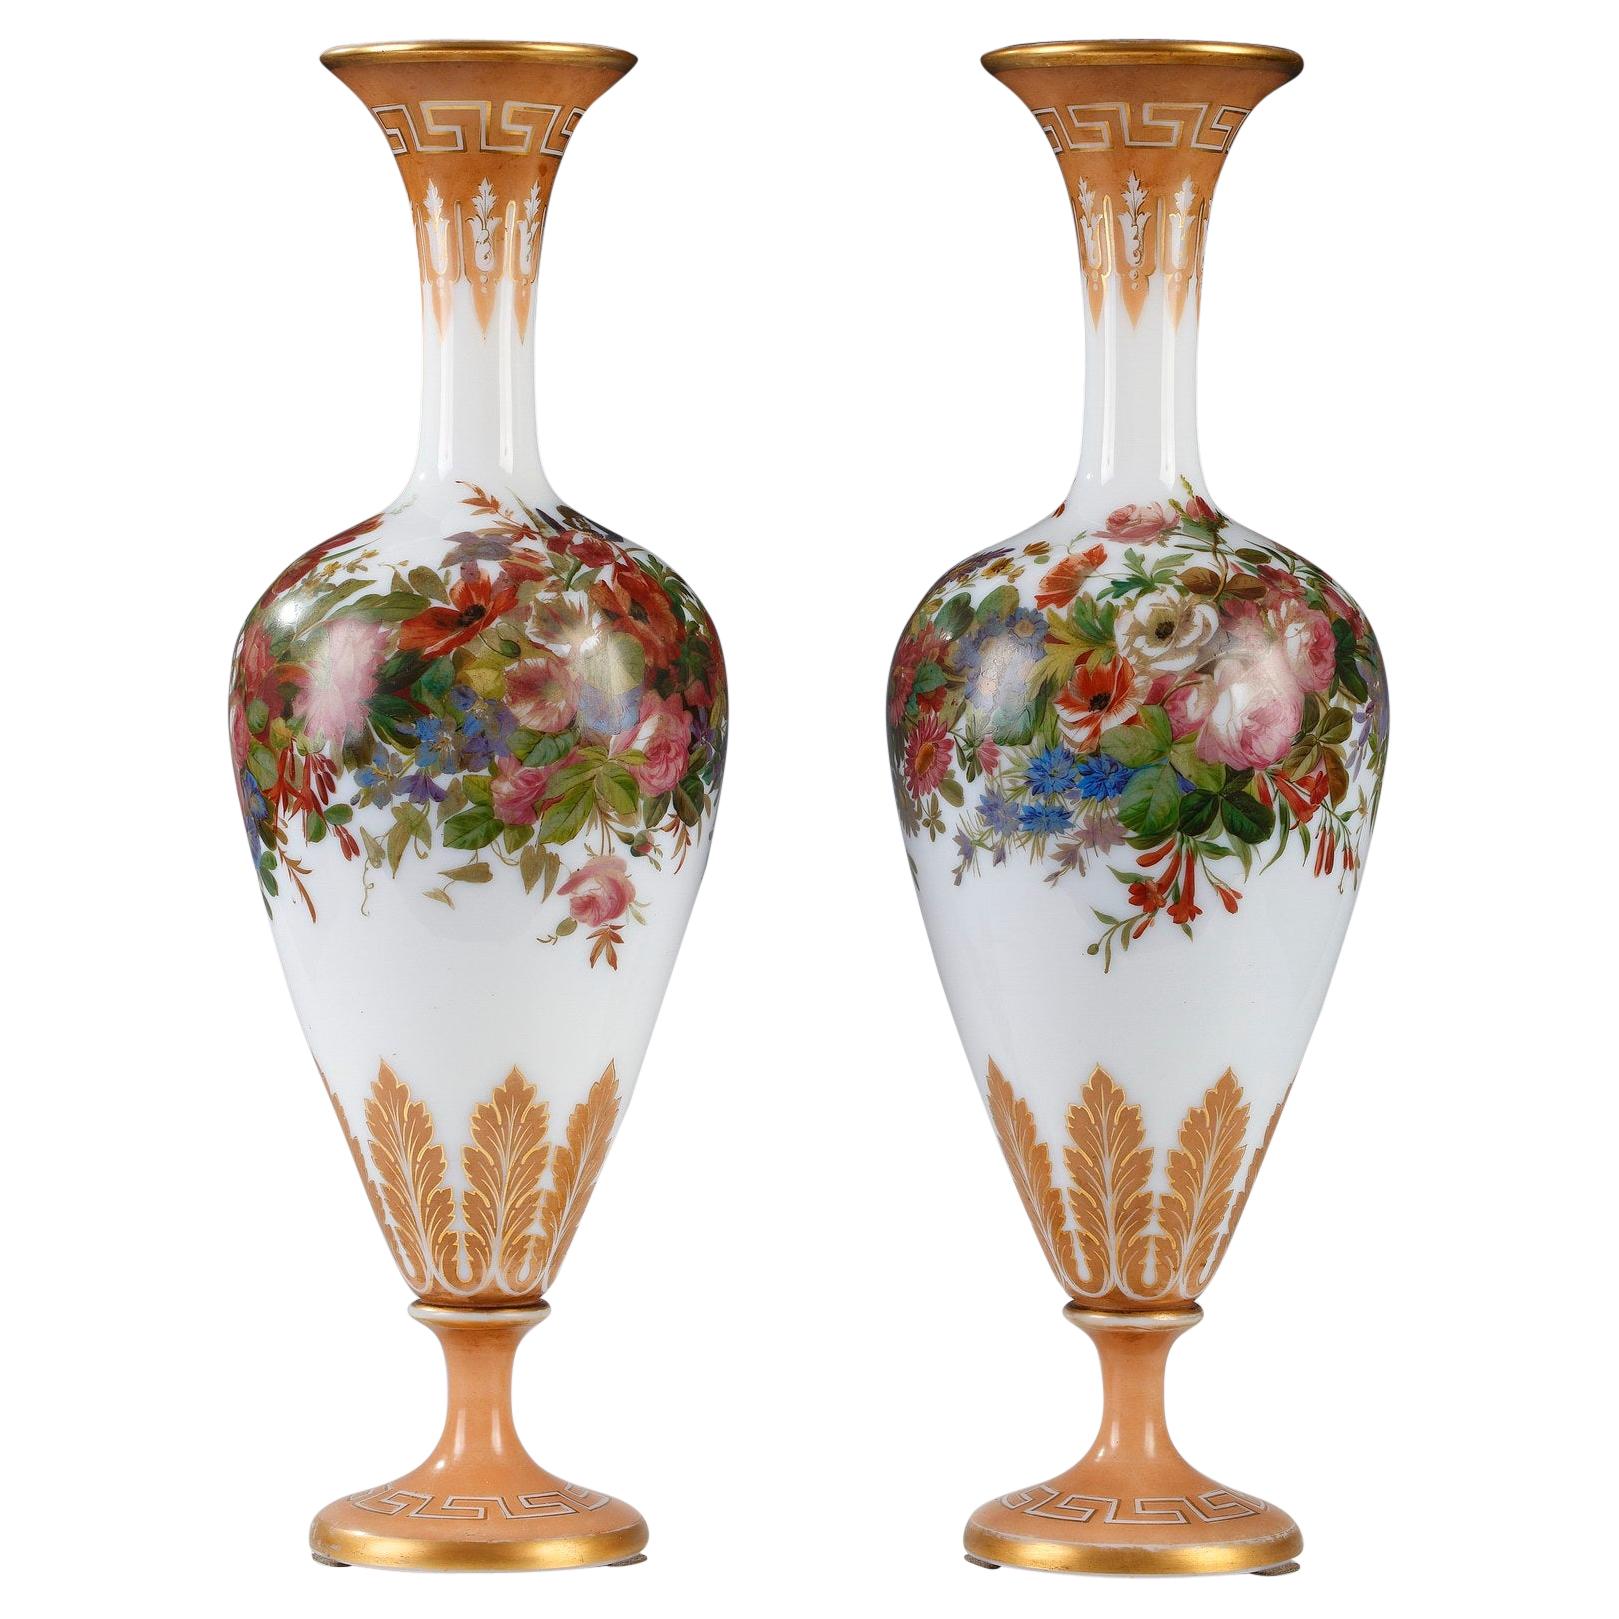 Pair of Opaline Vases by Baccarat, France, Circa 1870